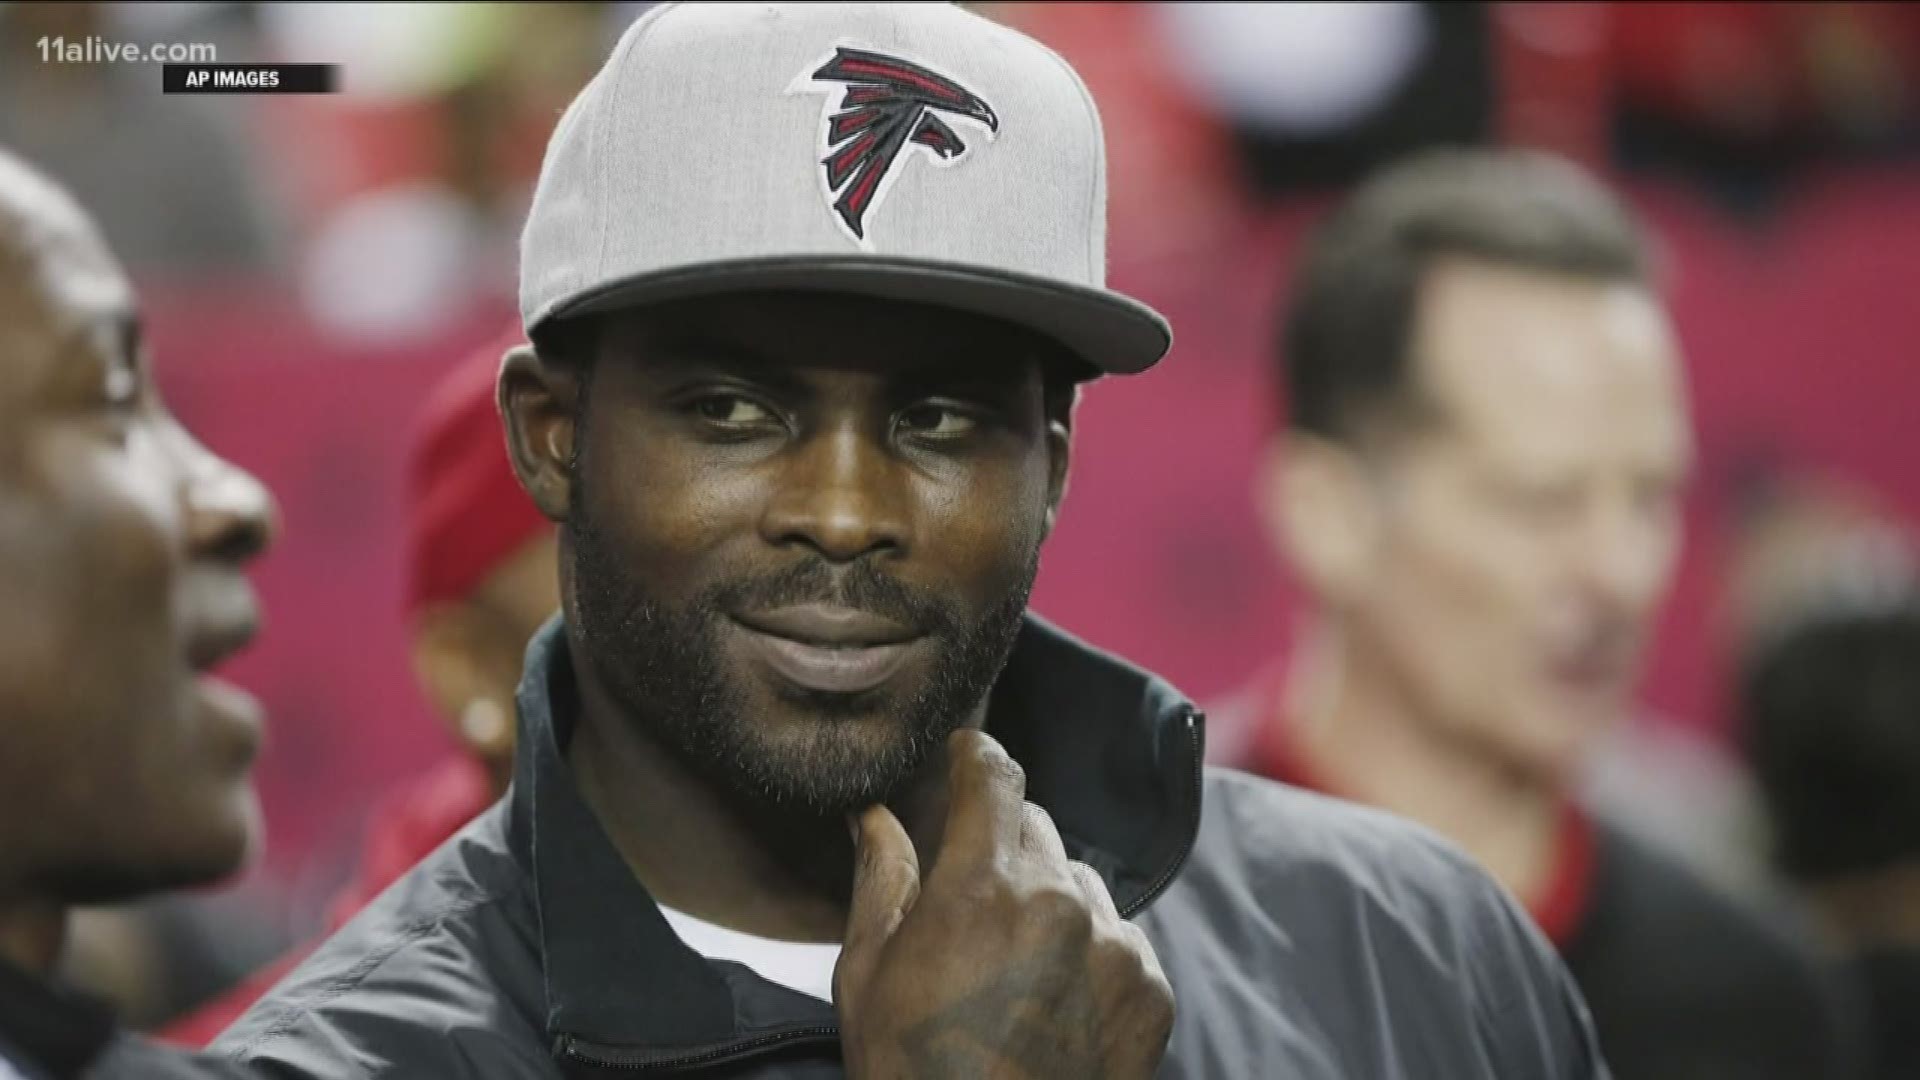 Petitions have circulated demanding the removal of Vick as an honorary Pro Bowl captain since he was announced as one.